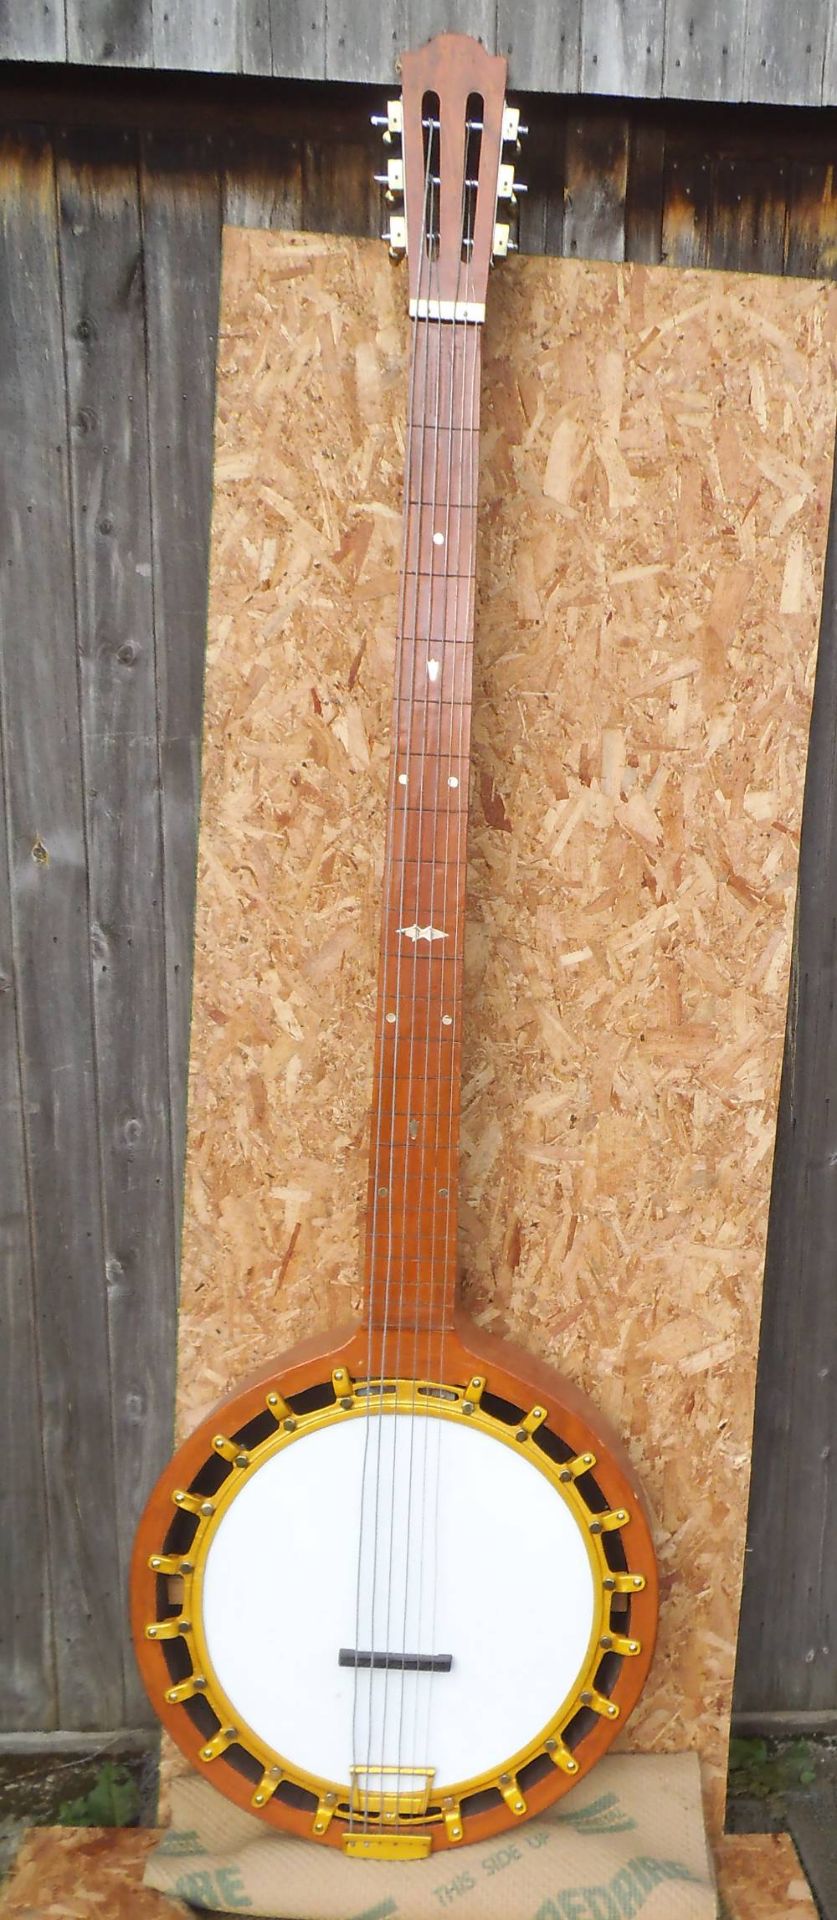 A large scale model of a banjo, 260 x 77 x 18cm.